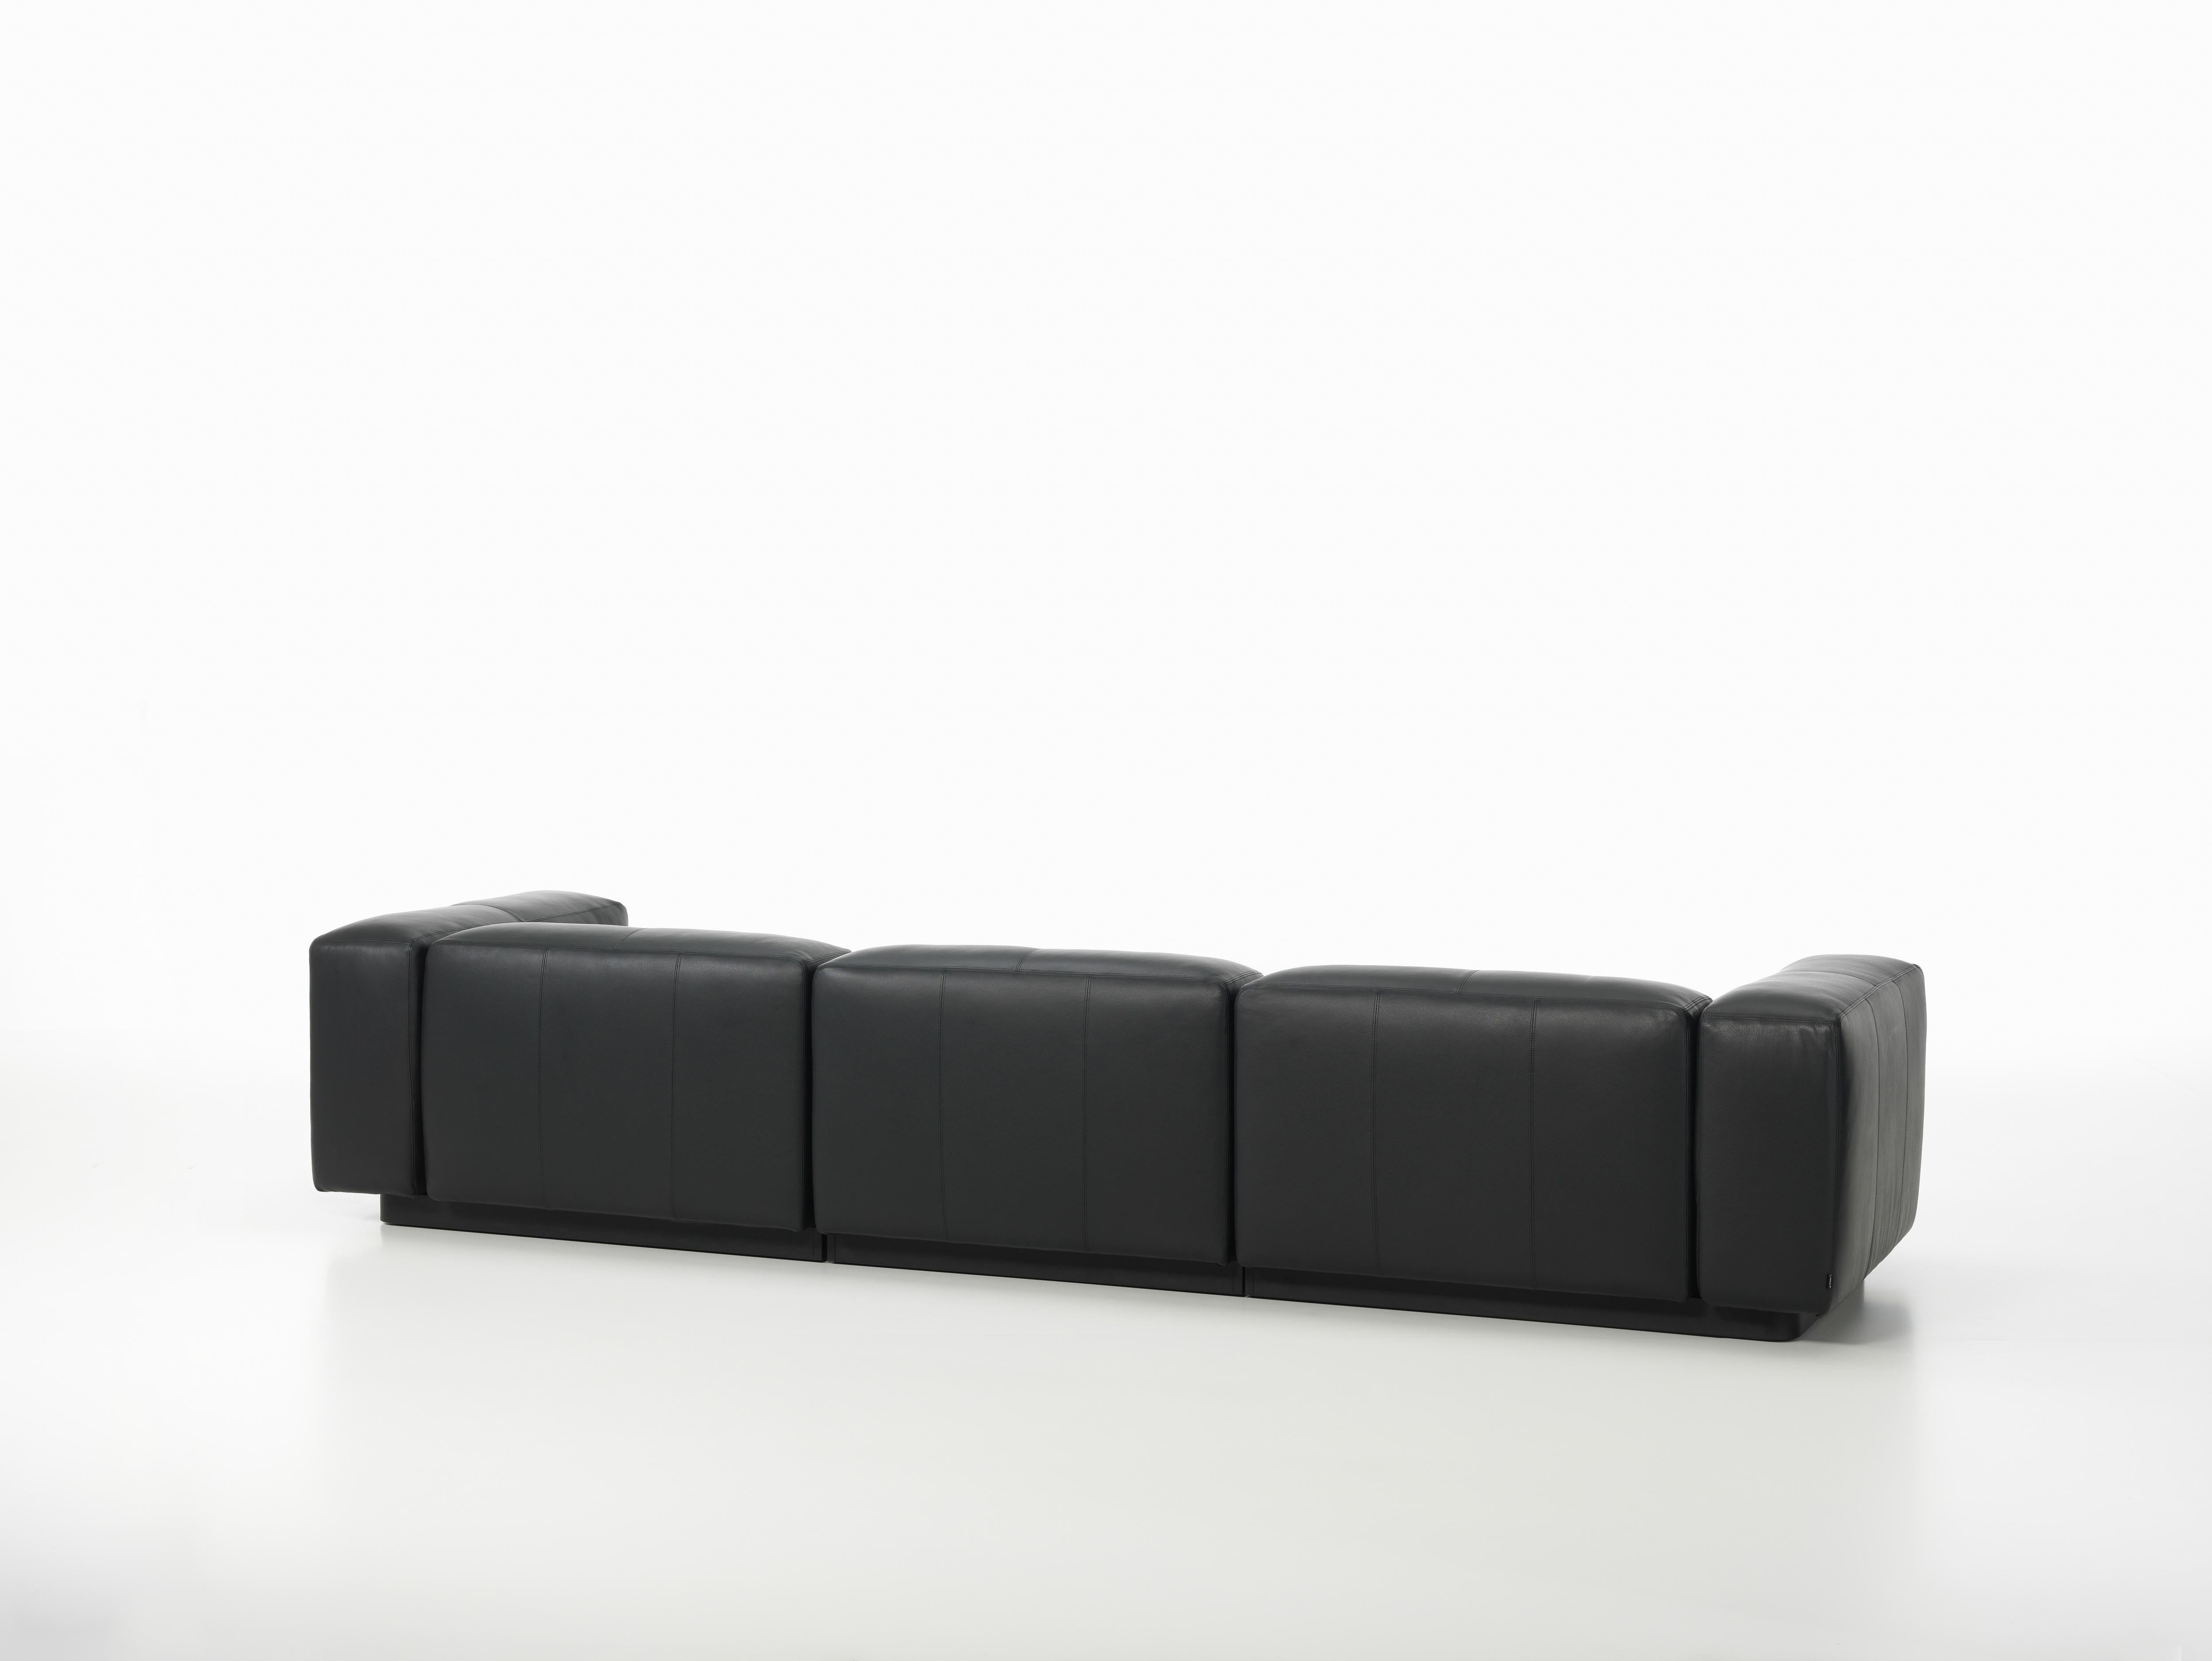 Vitra Soft Modular 3-Seat Sofa in Nero Leather by Jasper Morrison In New Condition For Sale In New York, NY